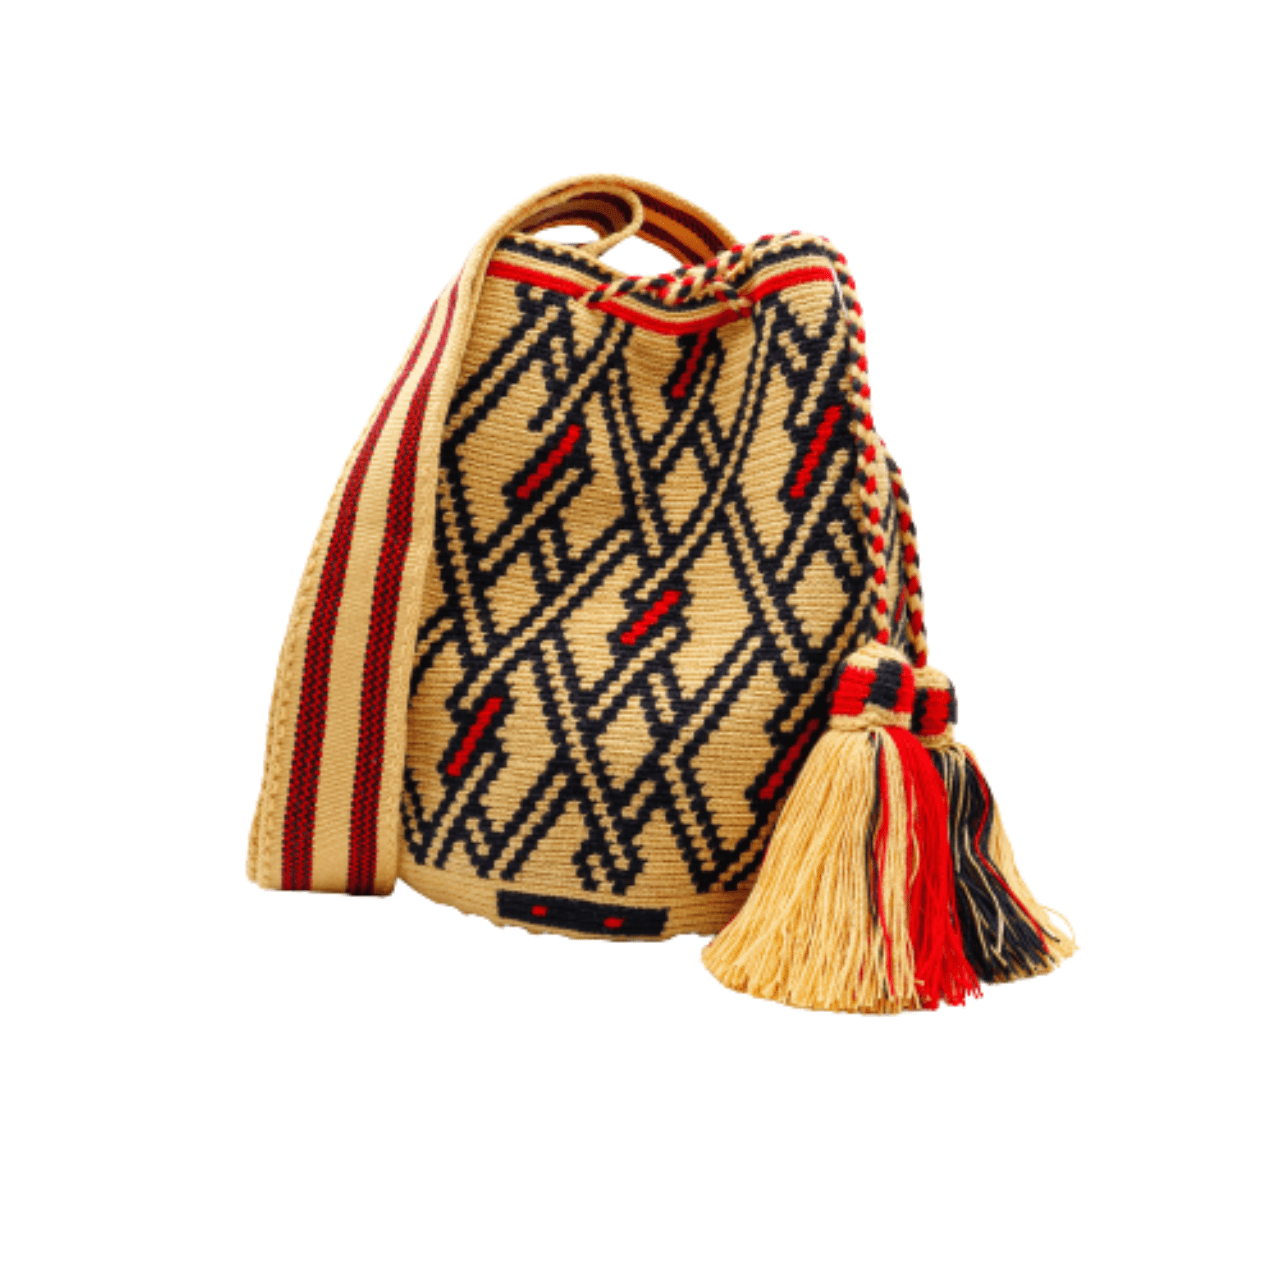 Nuna Wayuu Bag - Vanilla, Black, and Red Color Blend - Handcrafted Beauty and Elegance